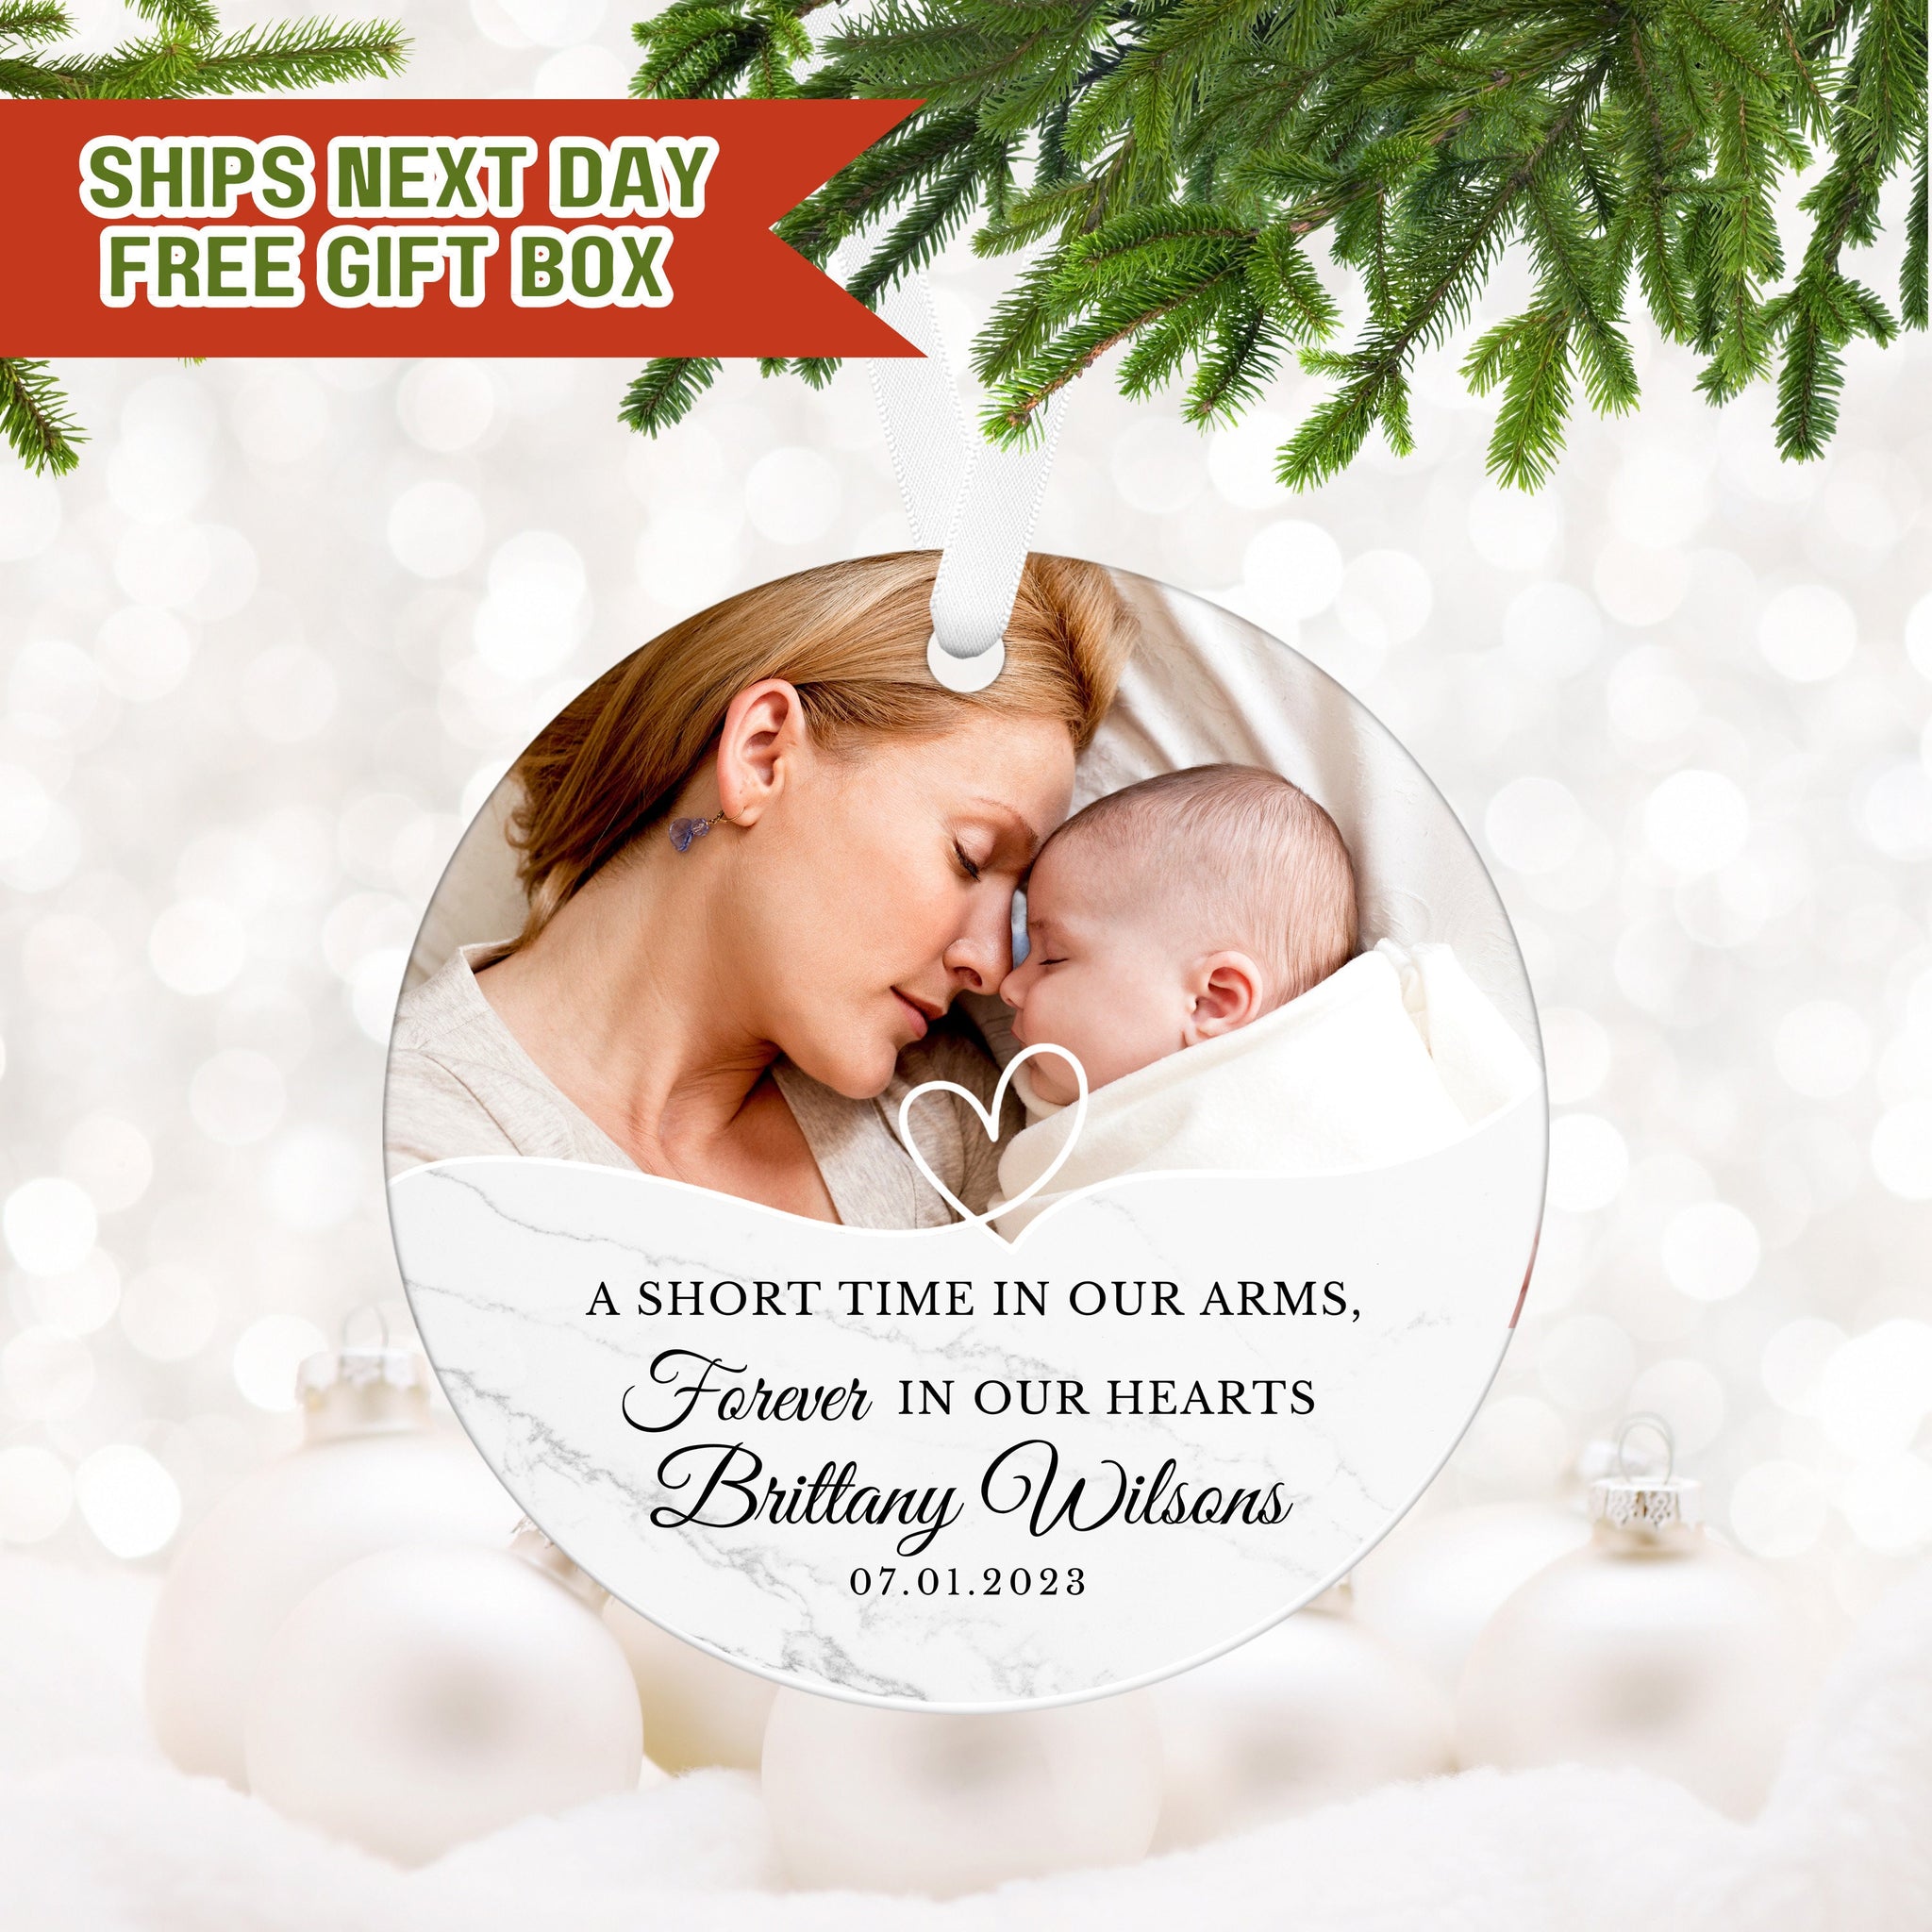 a christmas ornament with a picture of a woman holding a baby